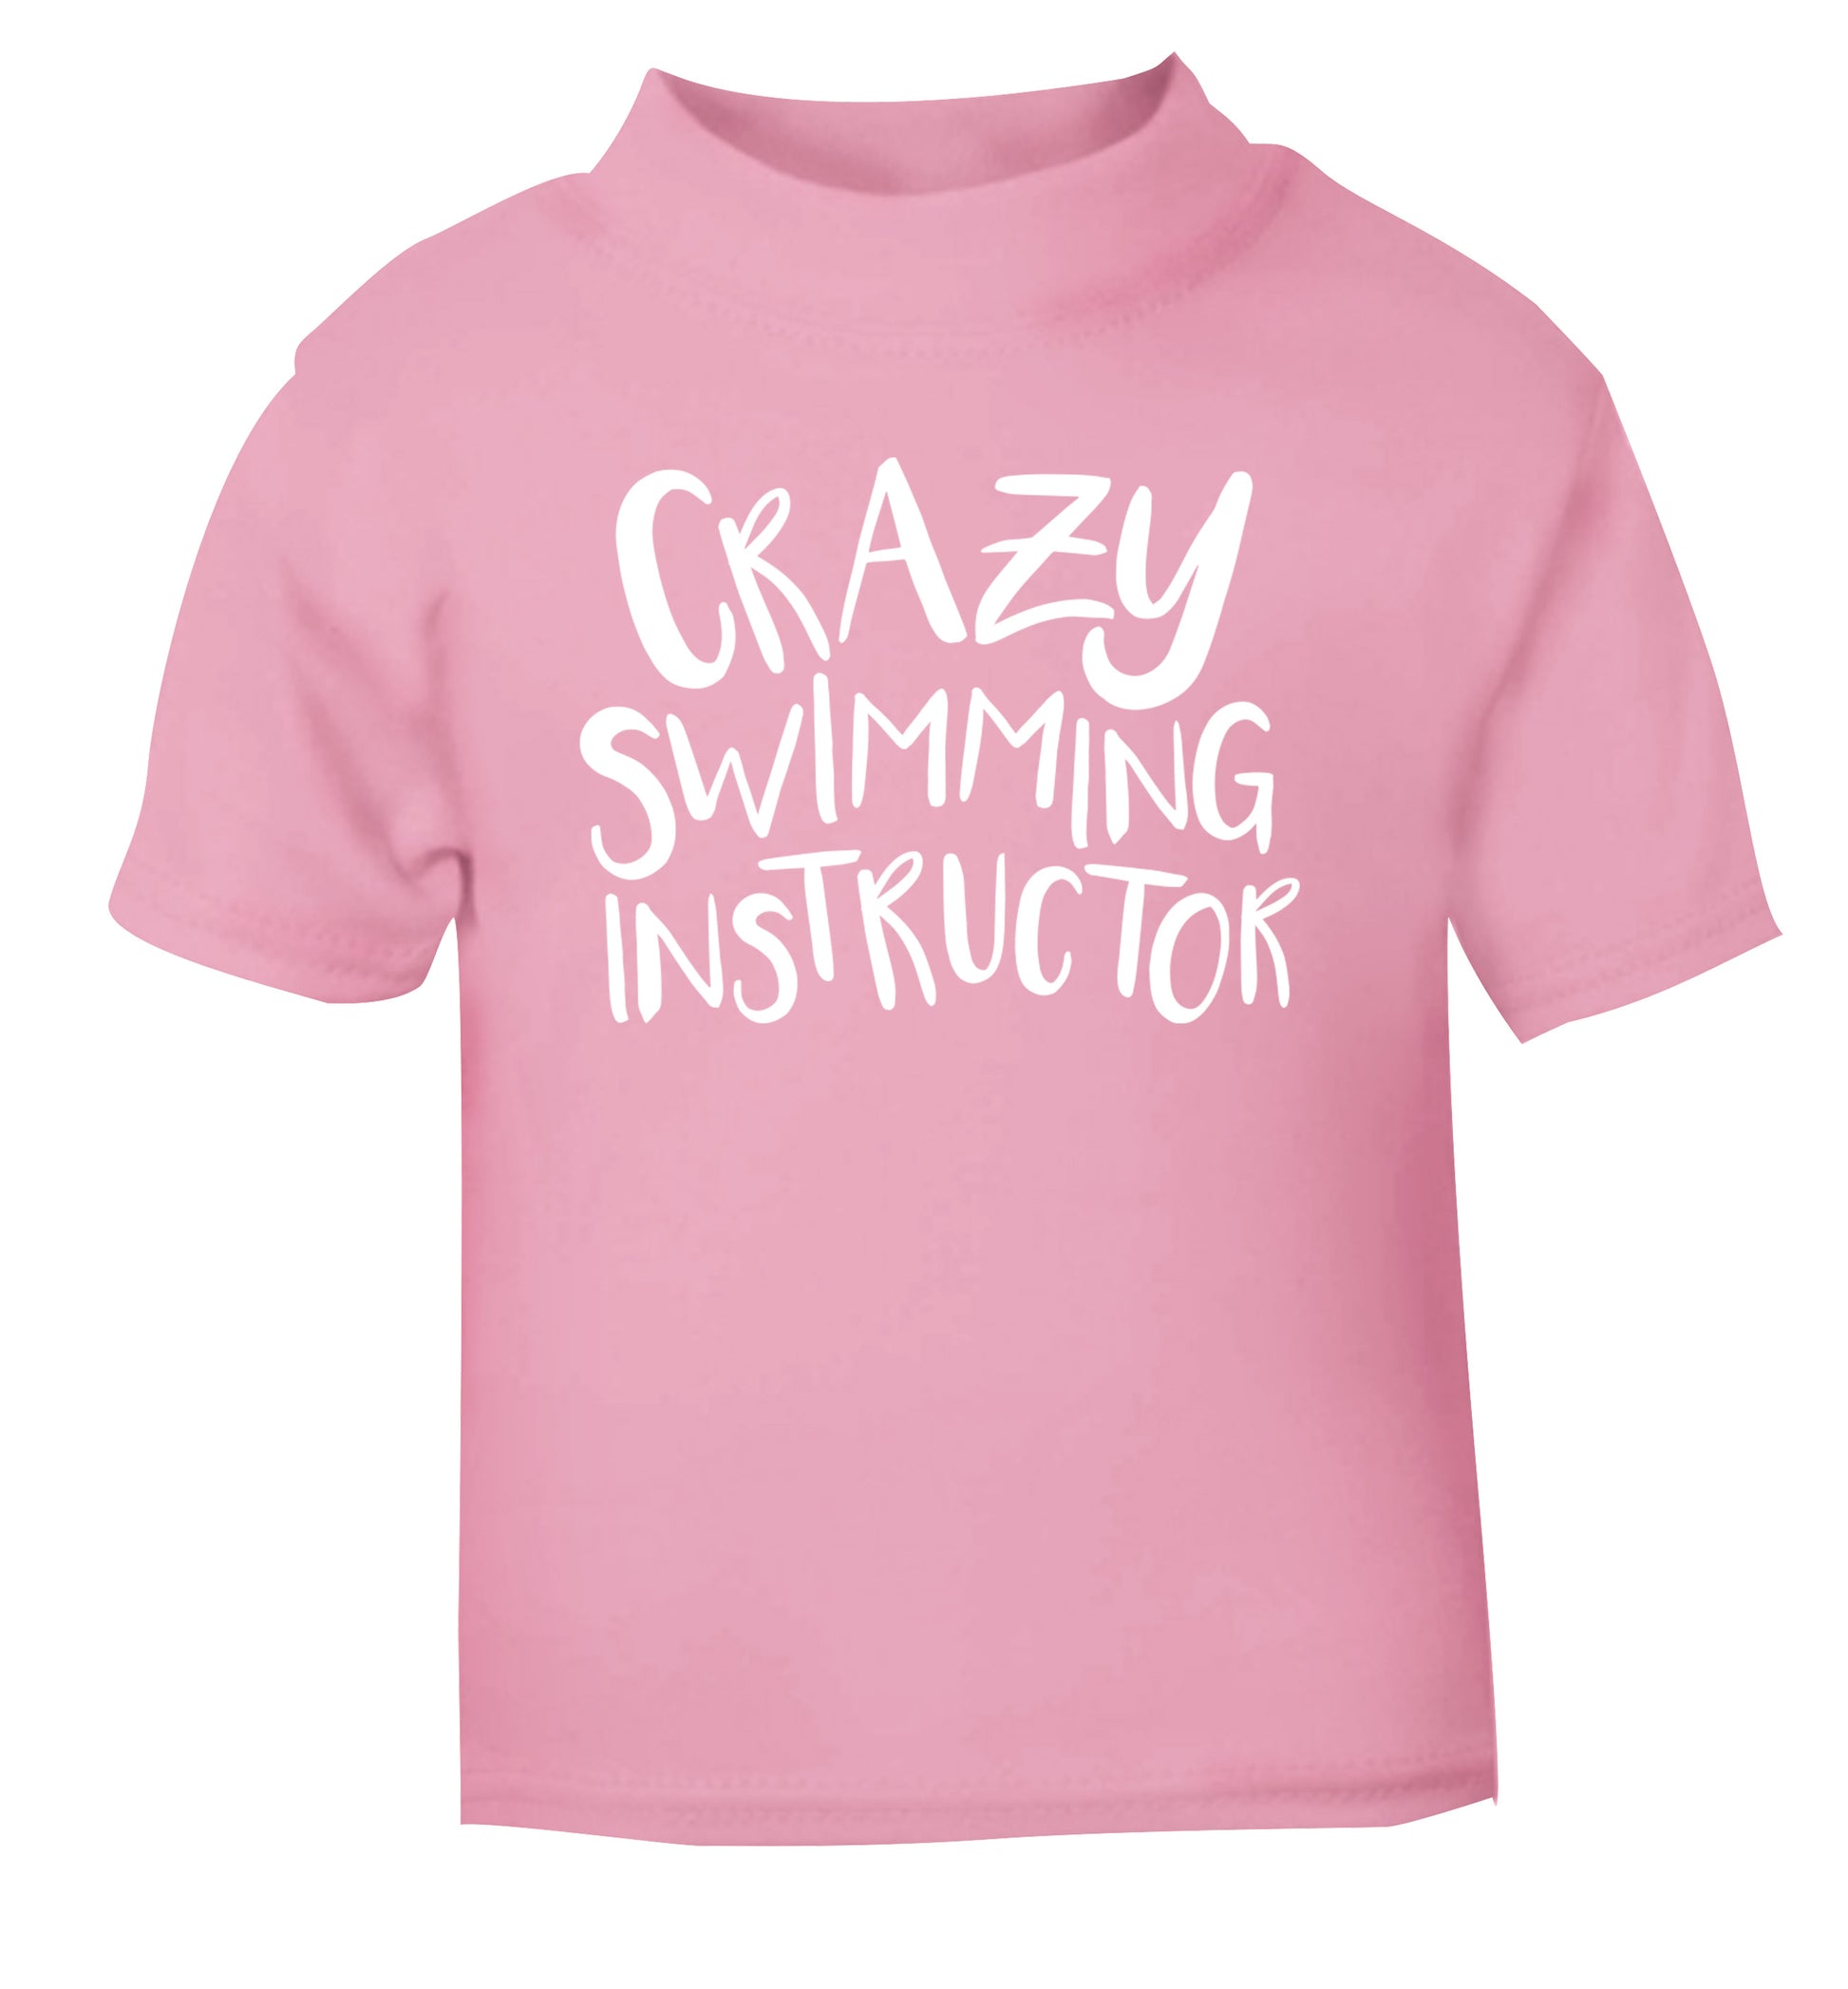 Crazy swimming instructor light pink Baby Toddler Tshirt 2 Years